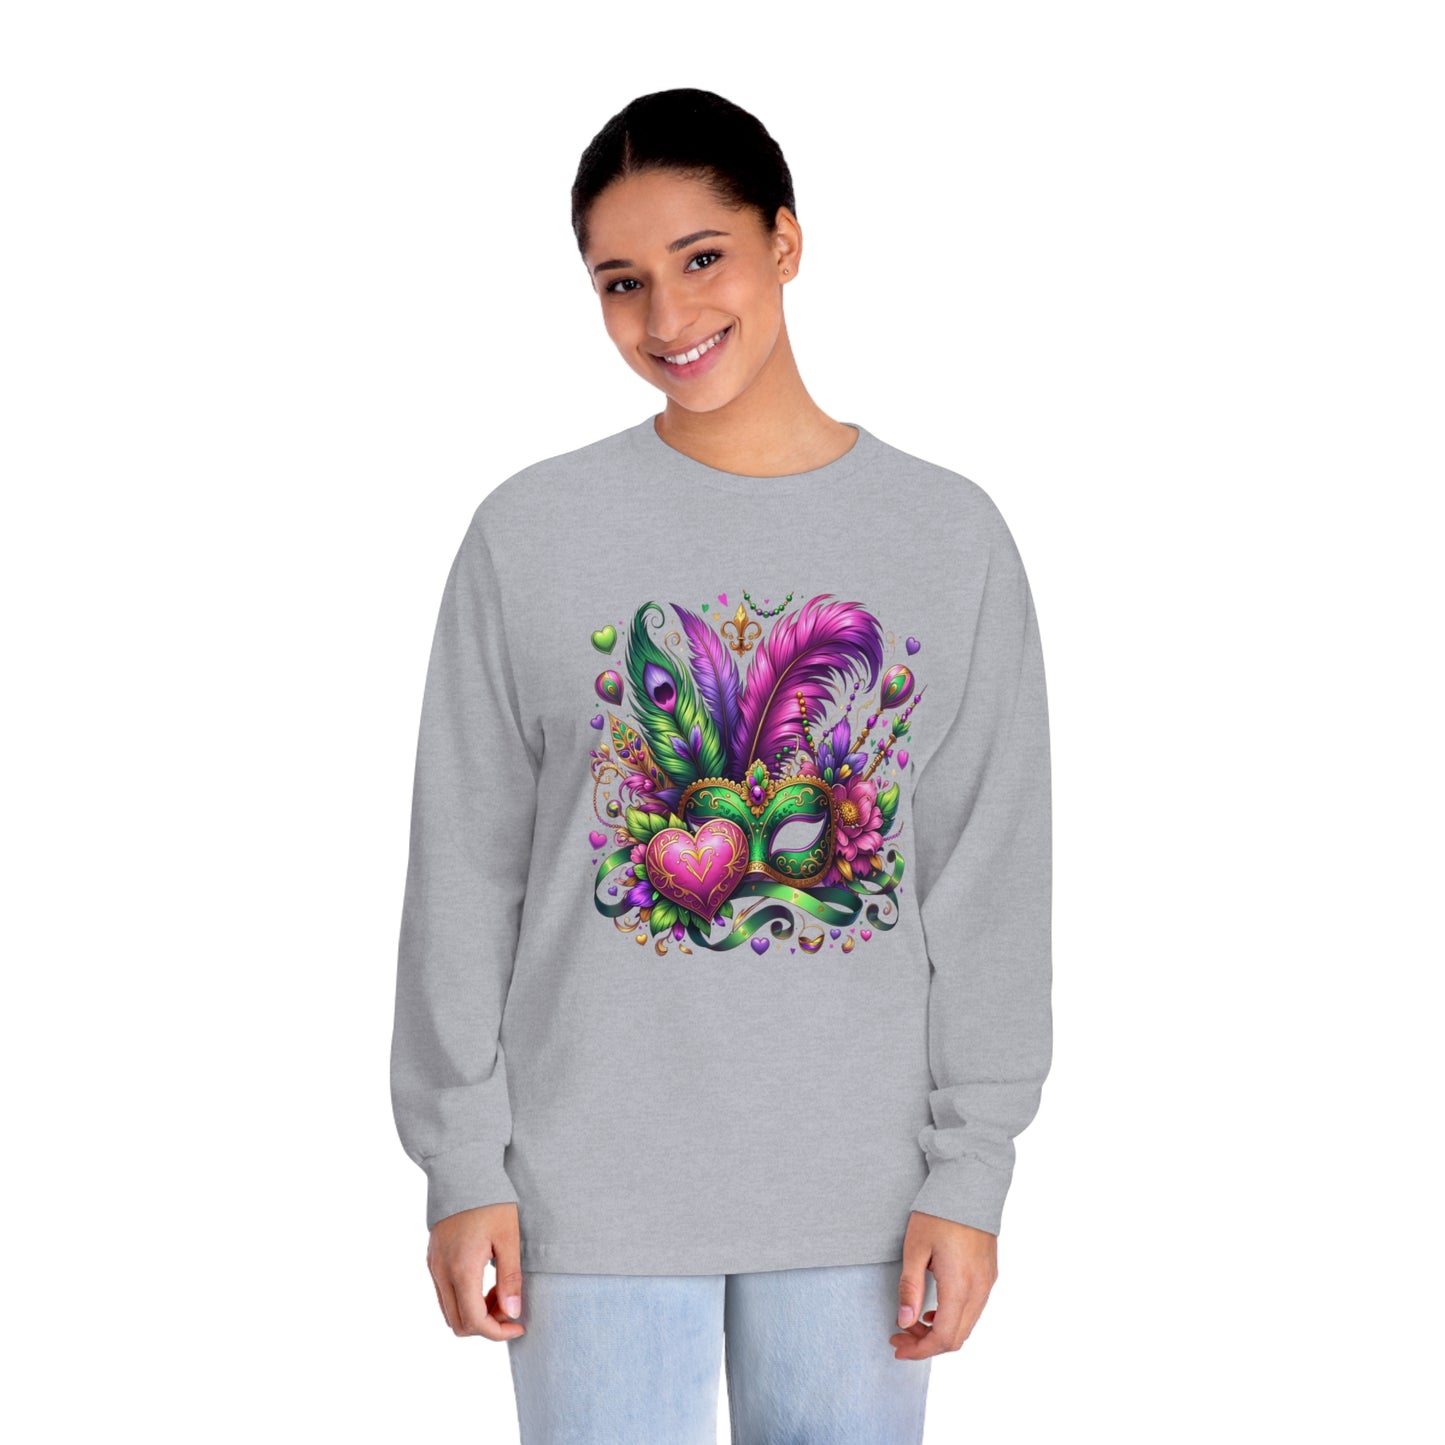 Enchanted Mardi Gras Love: Valentine's Day Meets Carnival Mask Unisex Classic Long Sleeve T-Shirt